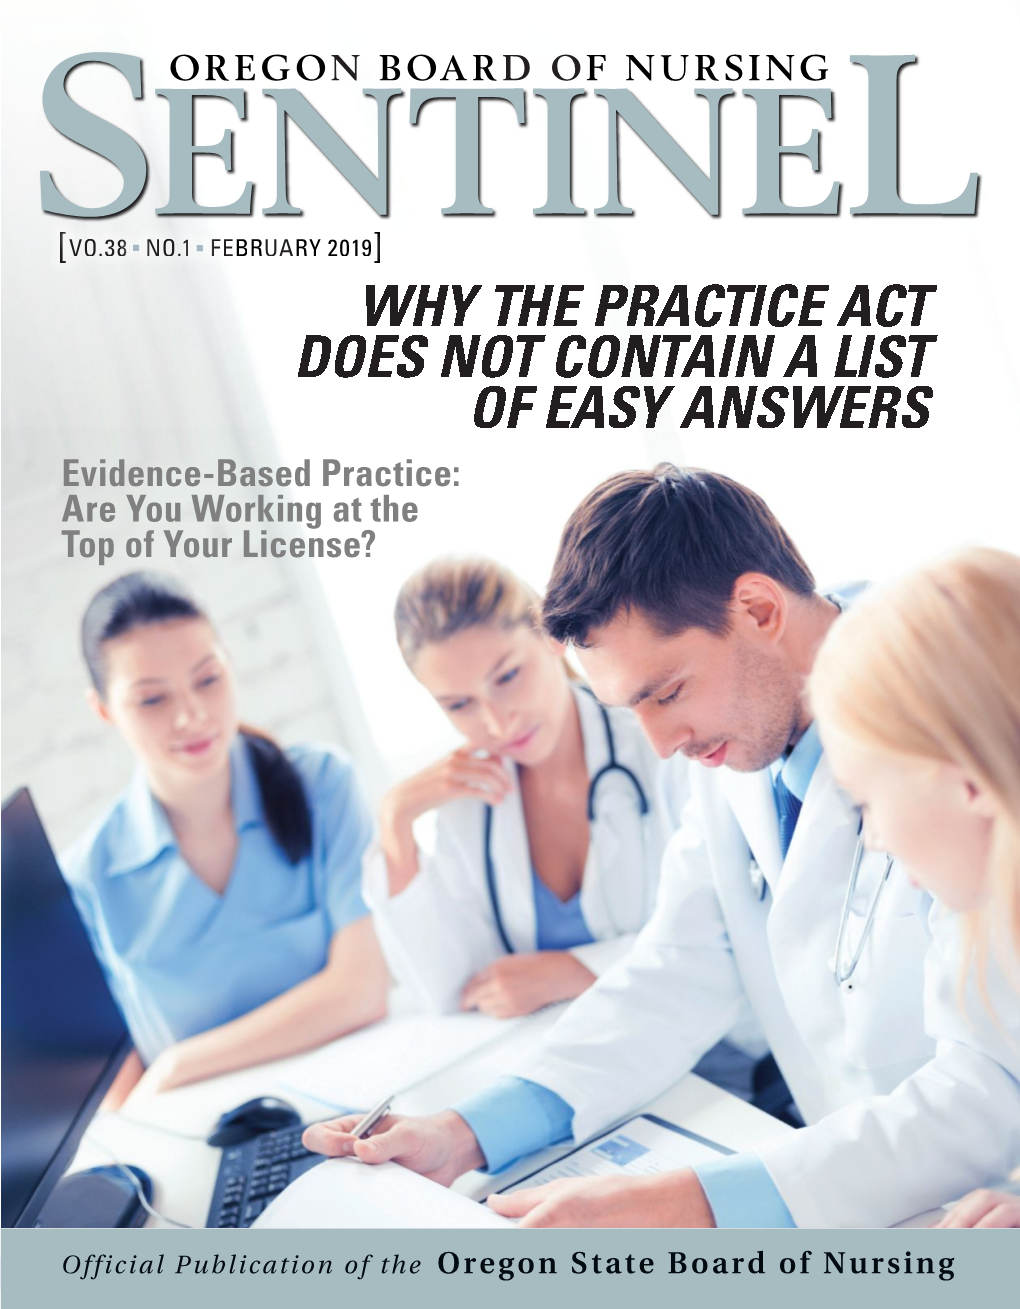 Evidence-Based Practice: Are You Working at the Top of Your License?